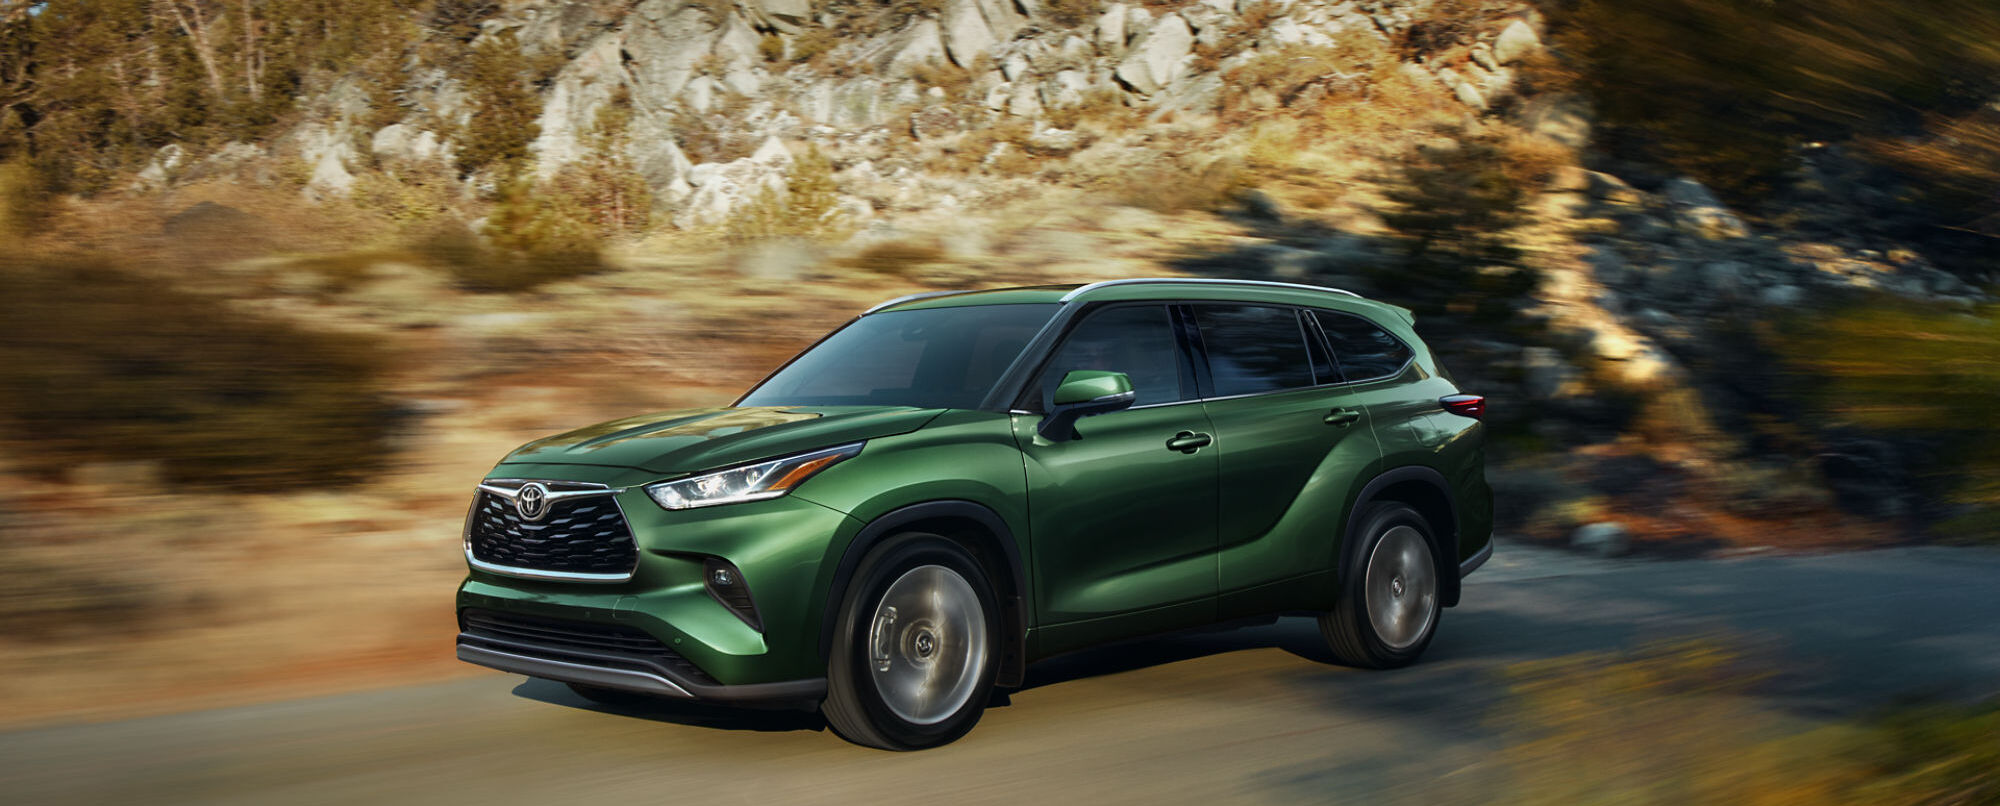 2020 Toyota Highlander Prices, Reviews, and Photos - MotorTrend